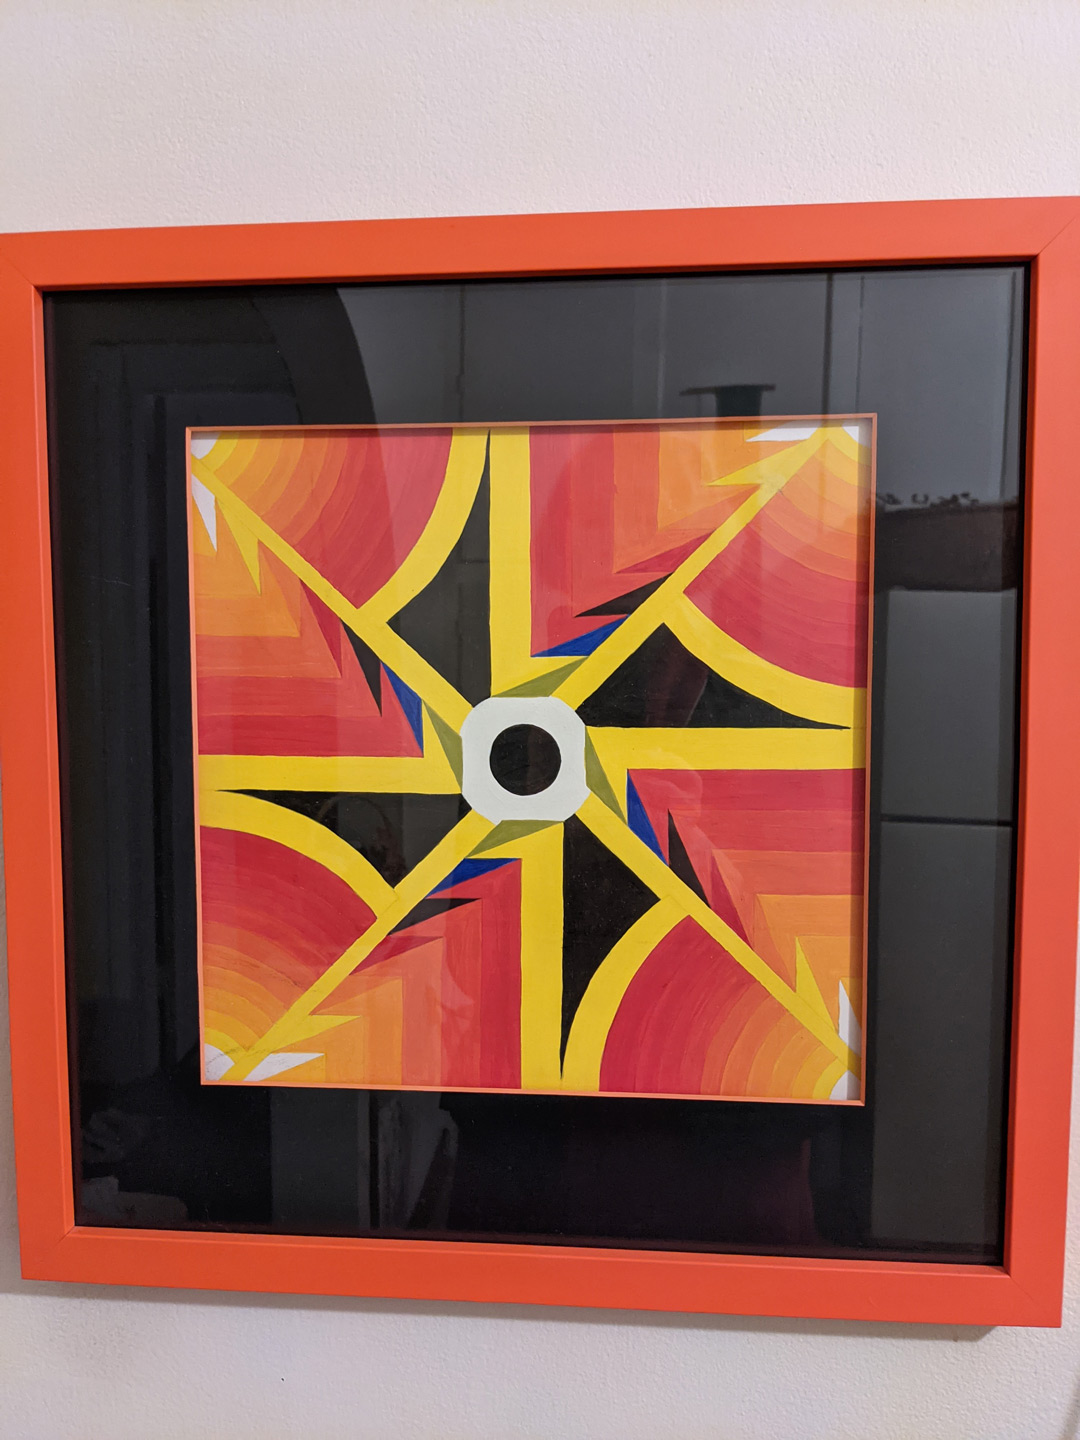 A graphic design of a spinning wheel in colors of orange, red, yellow, black and a little white and dark blue in a red frame with a black mat.